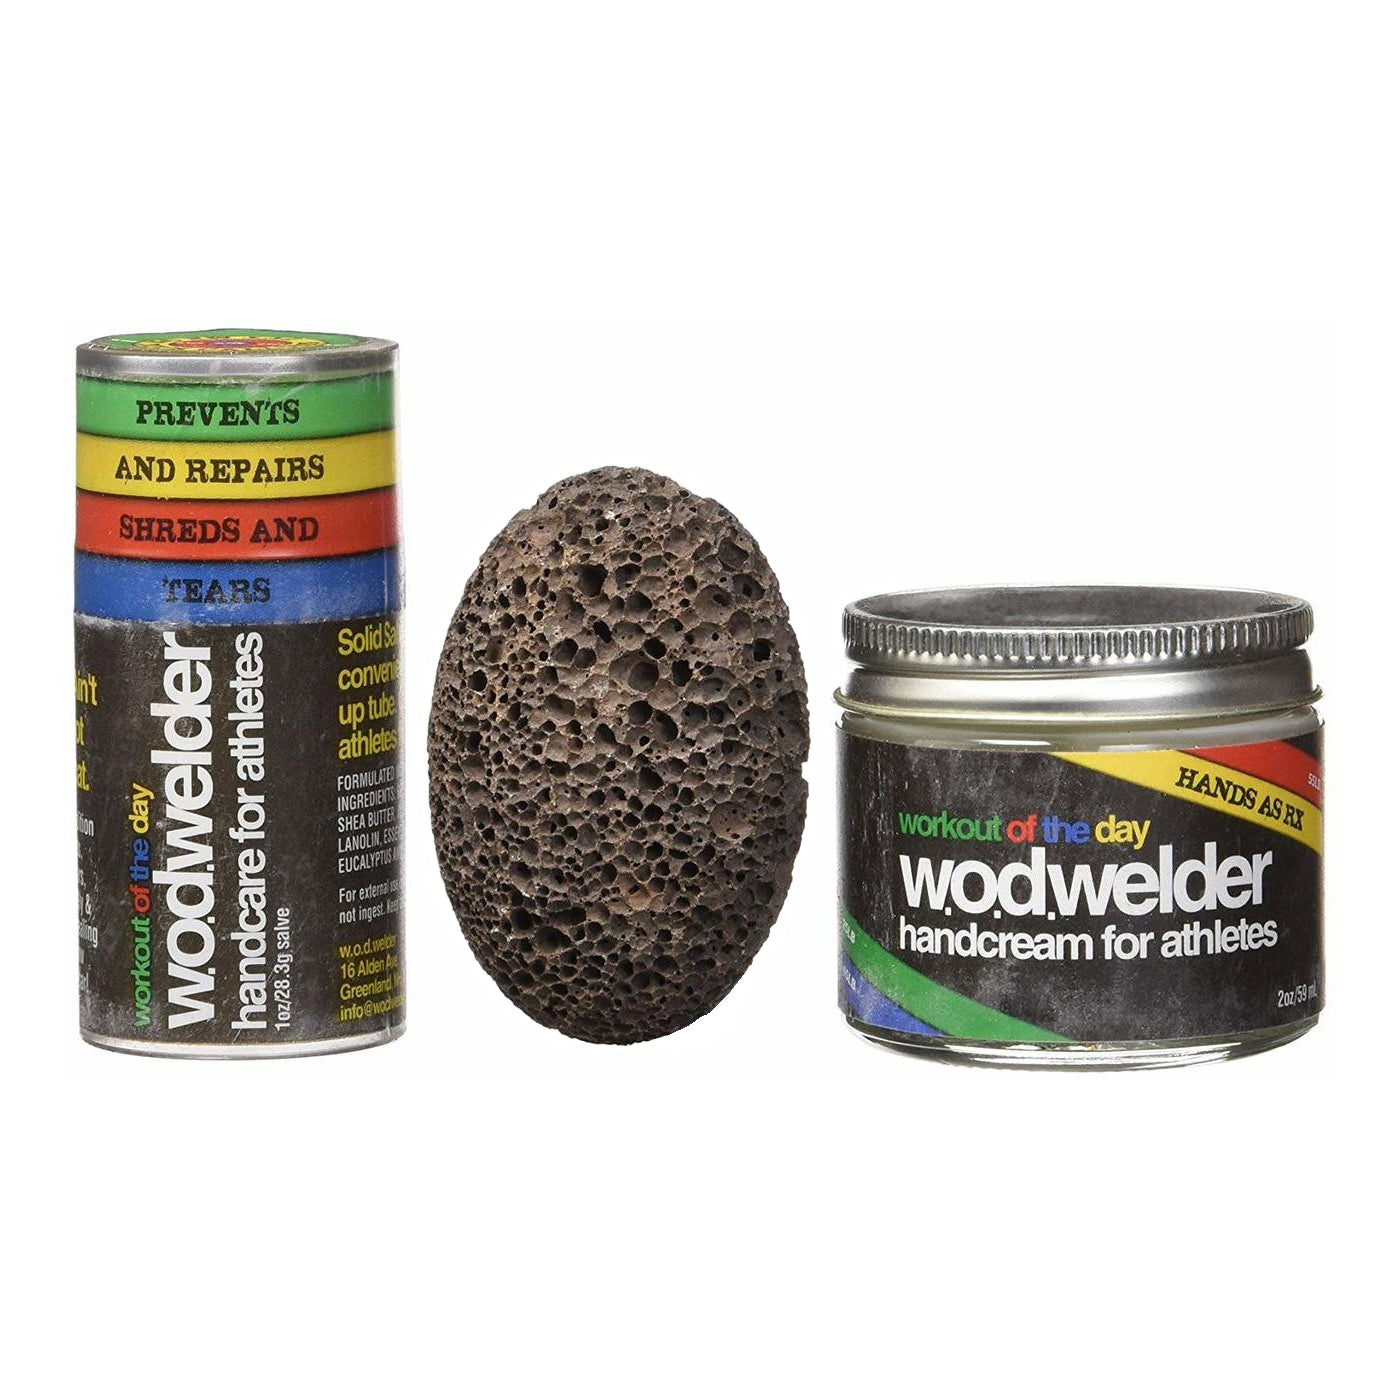 w.o.d.welder Hand Care Kit (with Pumice Stone)